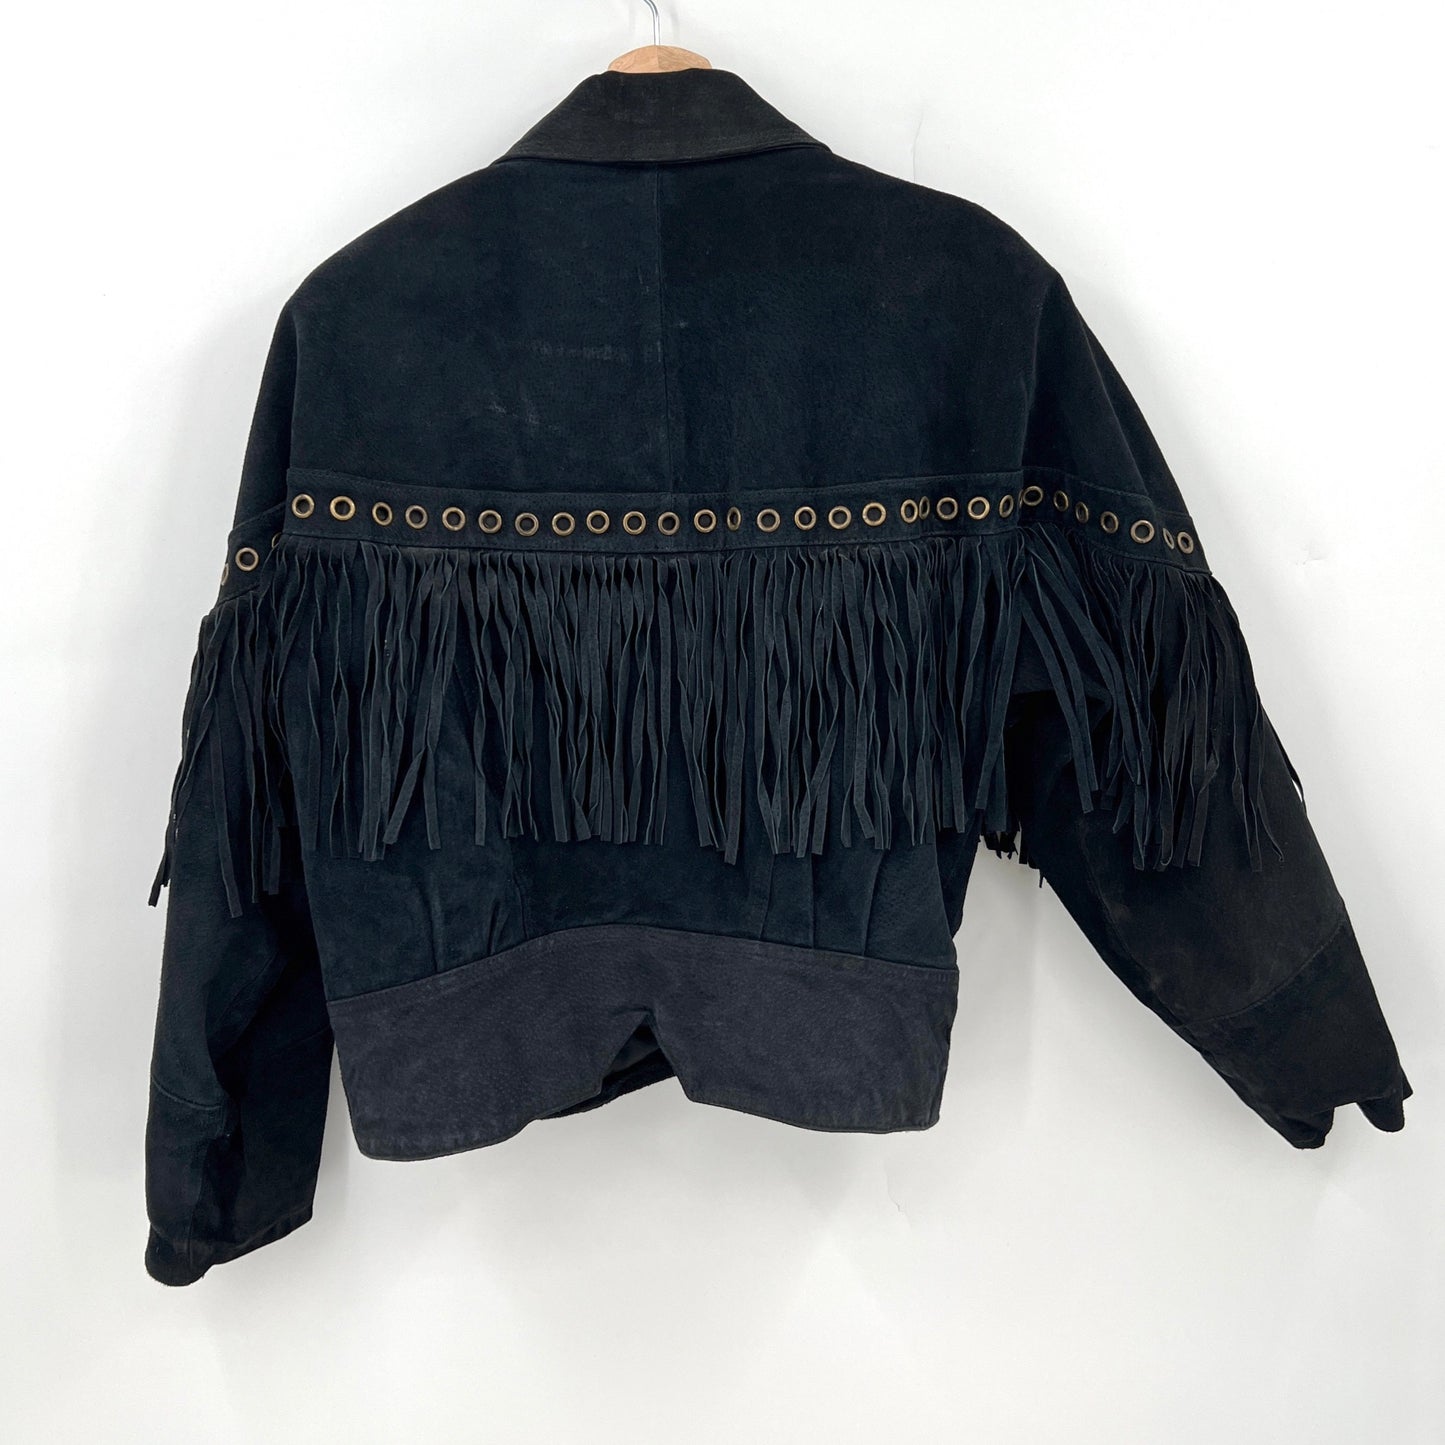 SOLD. Vintage Very Trendy Cropped Fringed Leather Jacket M